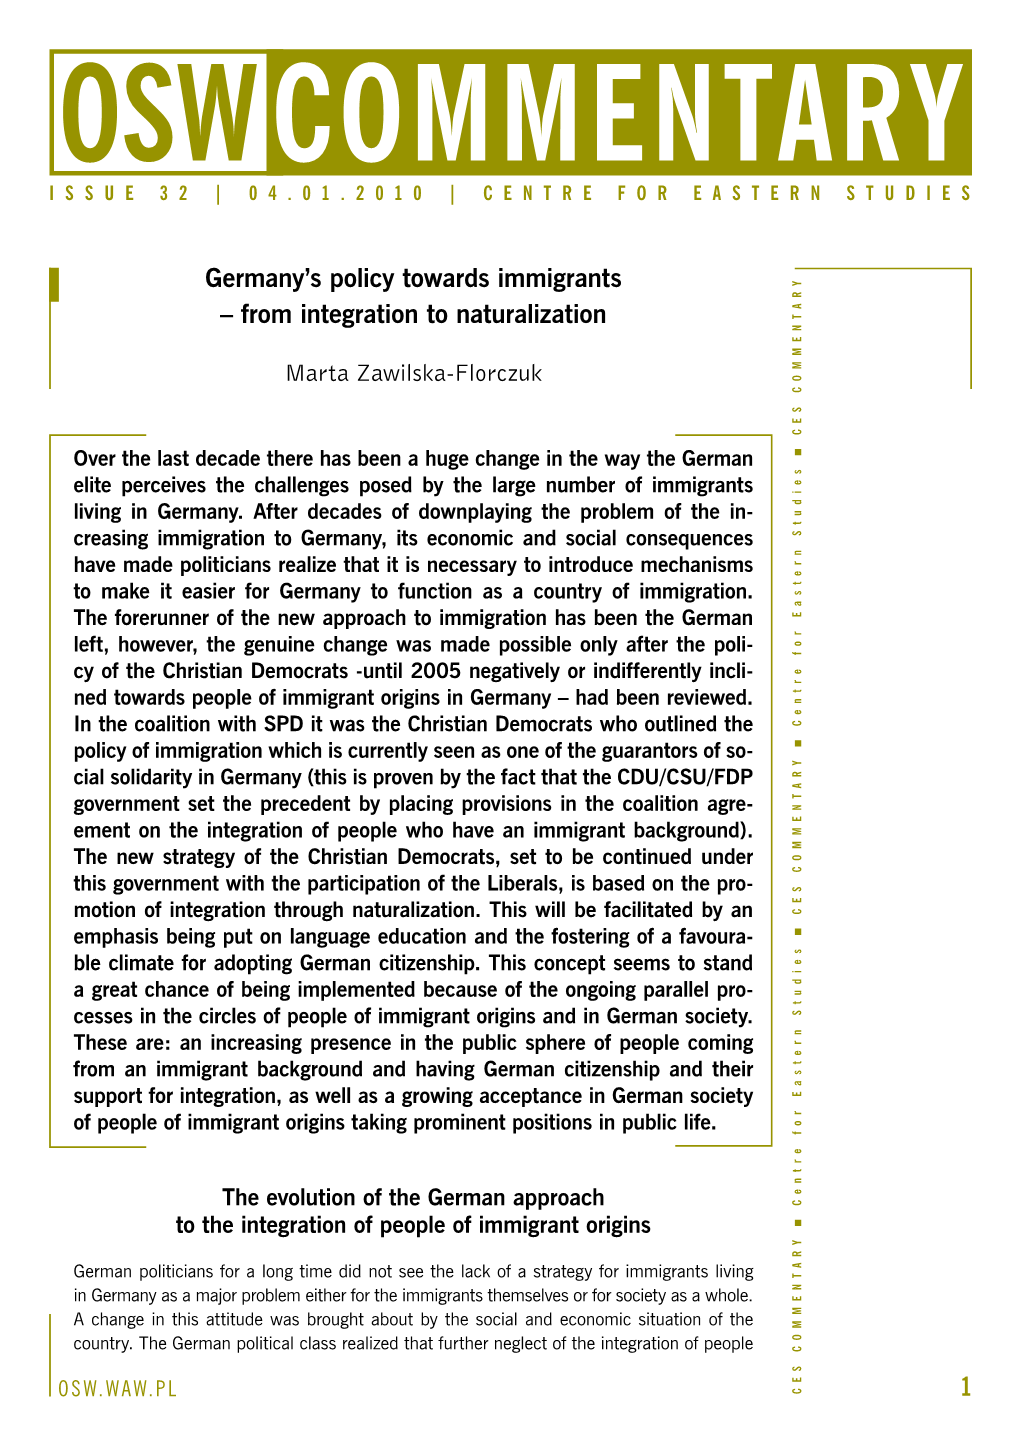 Germany's Policy Towards Immigrants